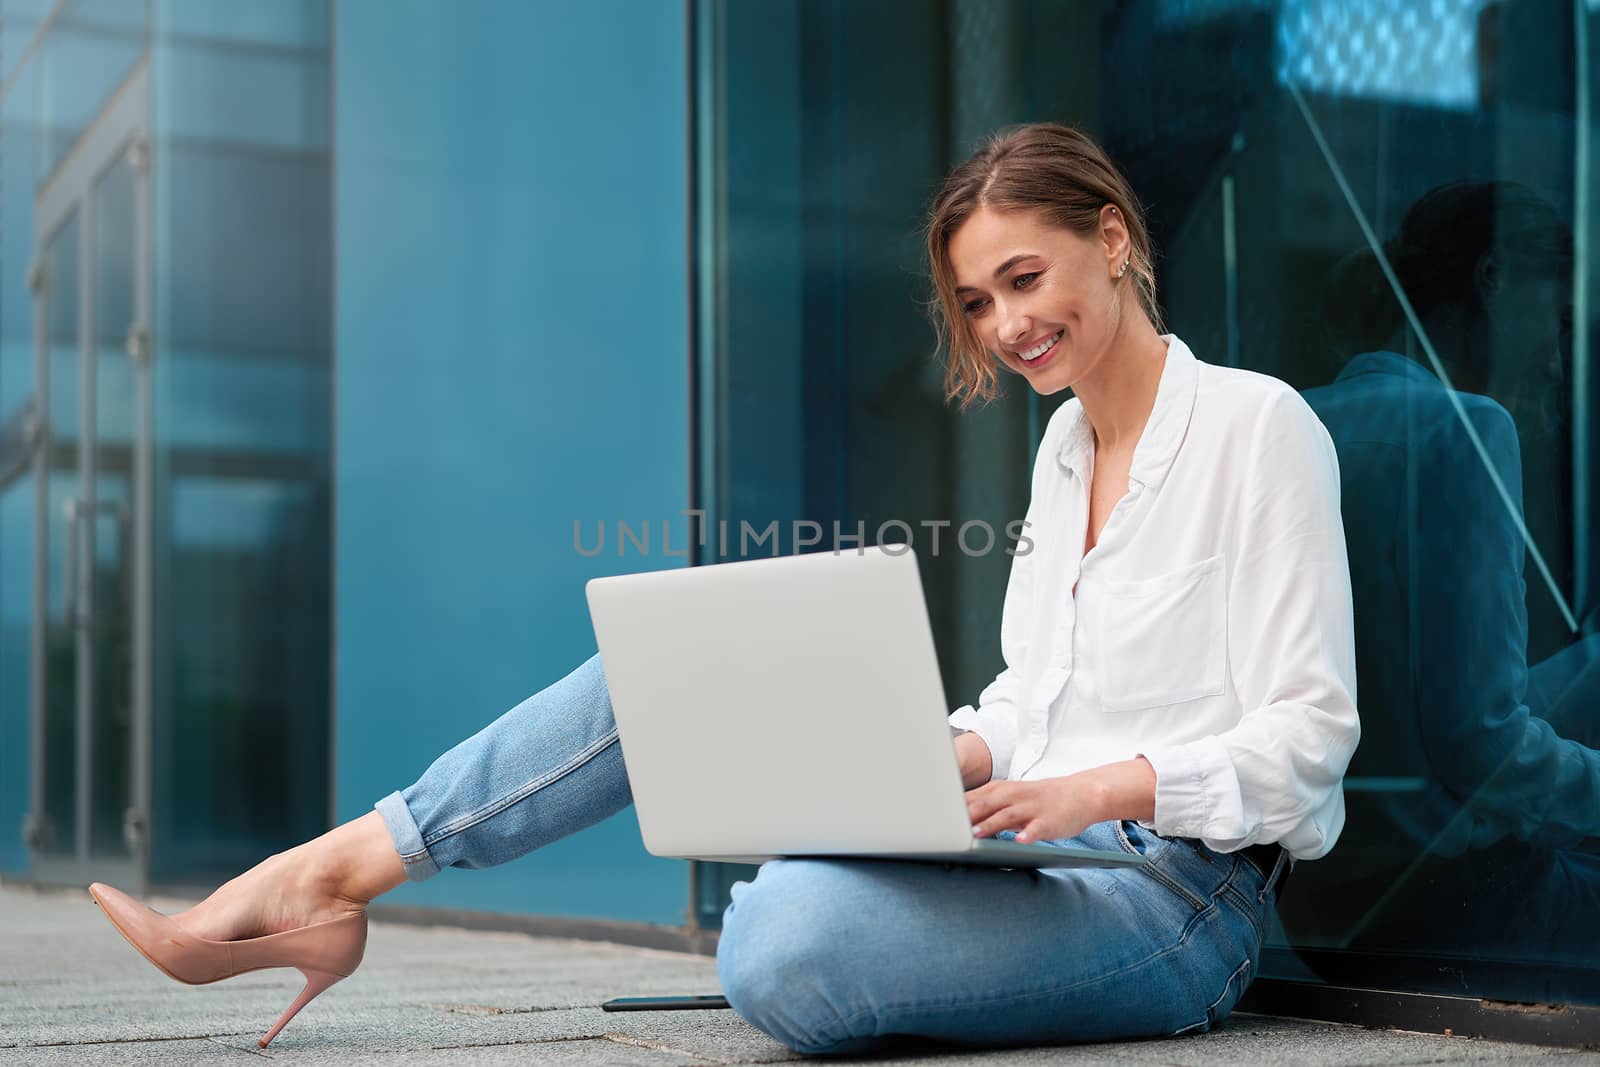 Businesswoman laptop successful woman business person outdoor corporate building exterior Pensive elegance caucasian professional business woman middle age ecommerce deal Online banking